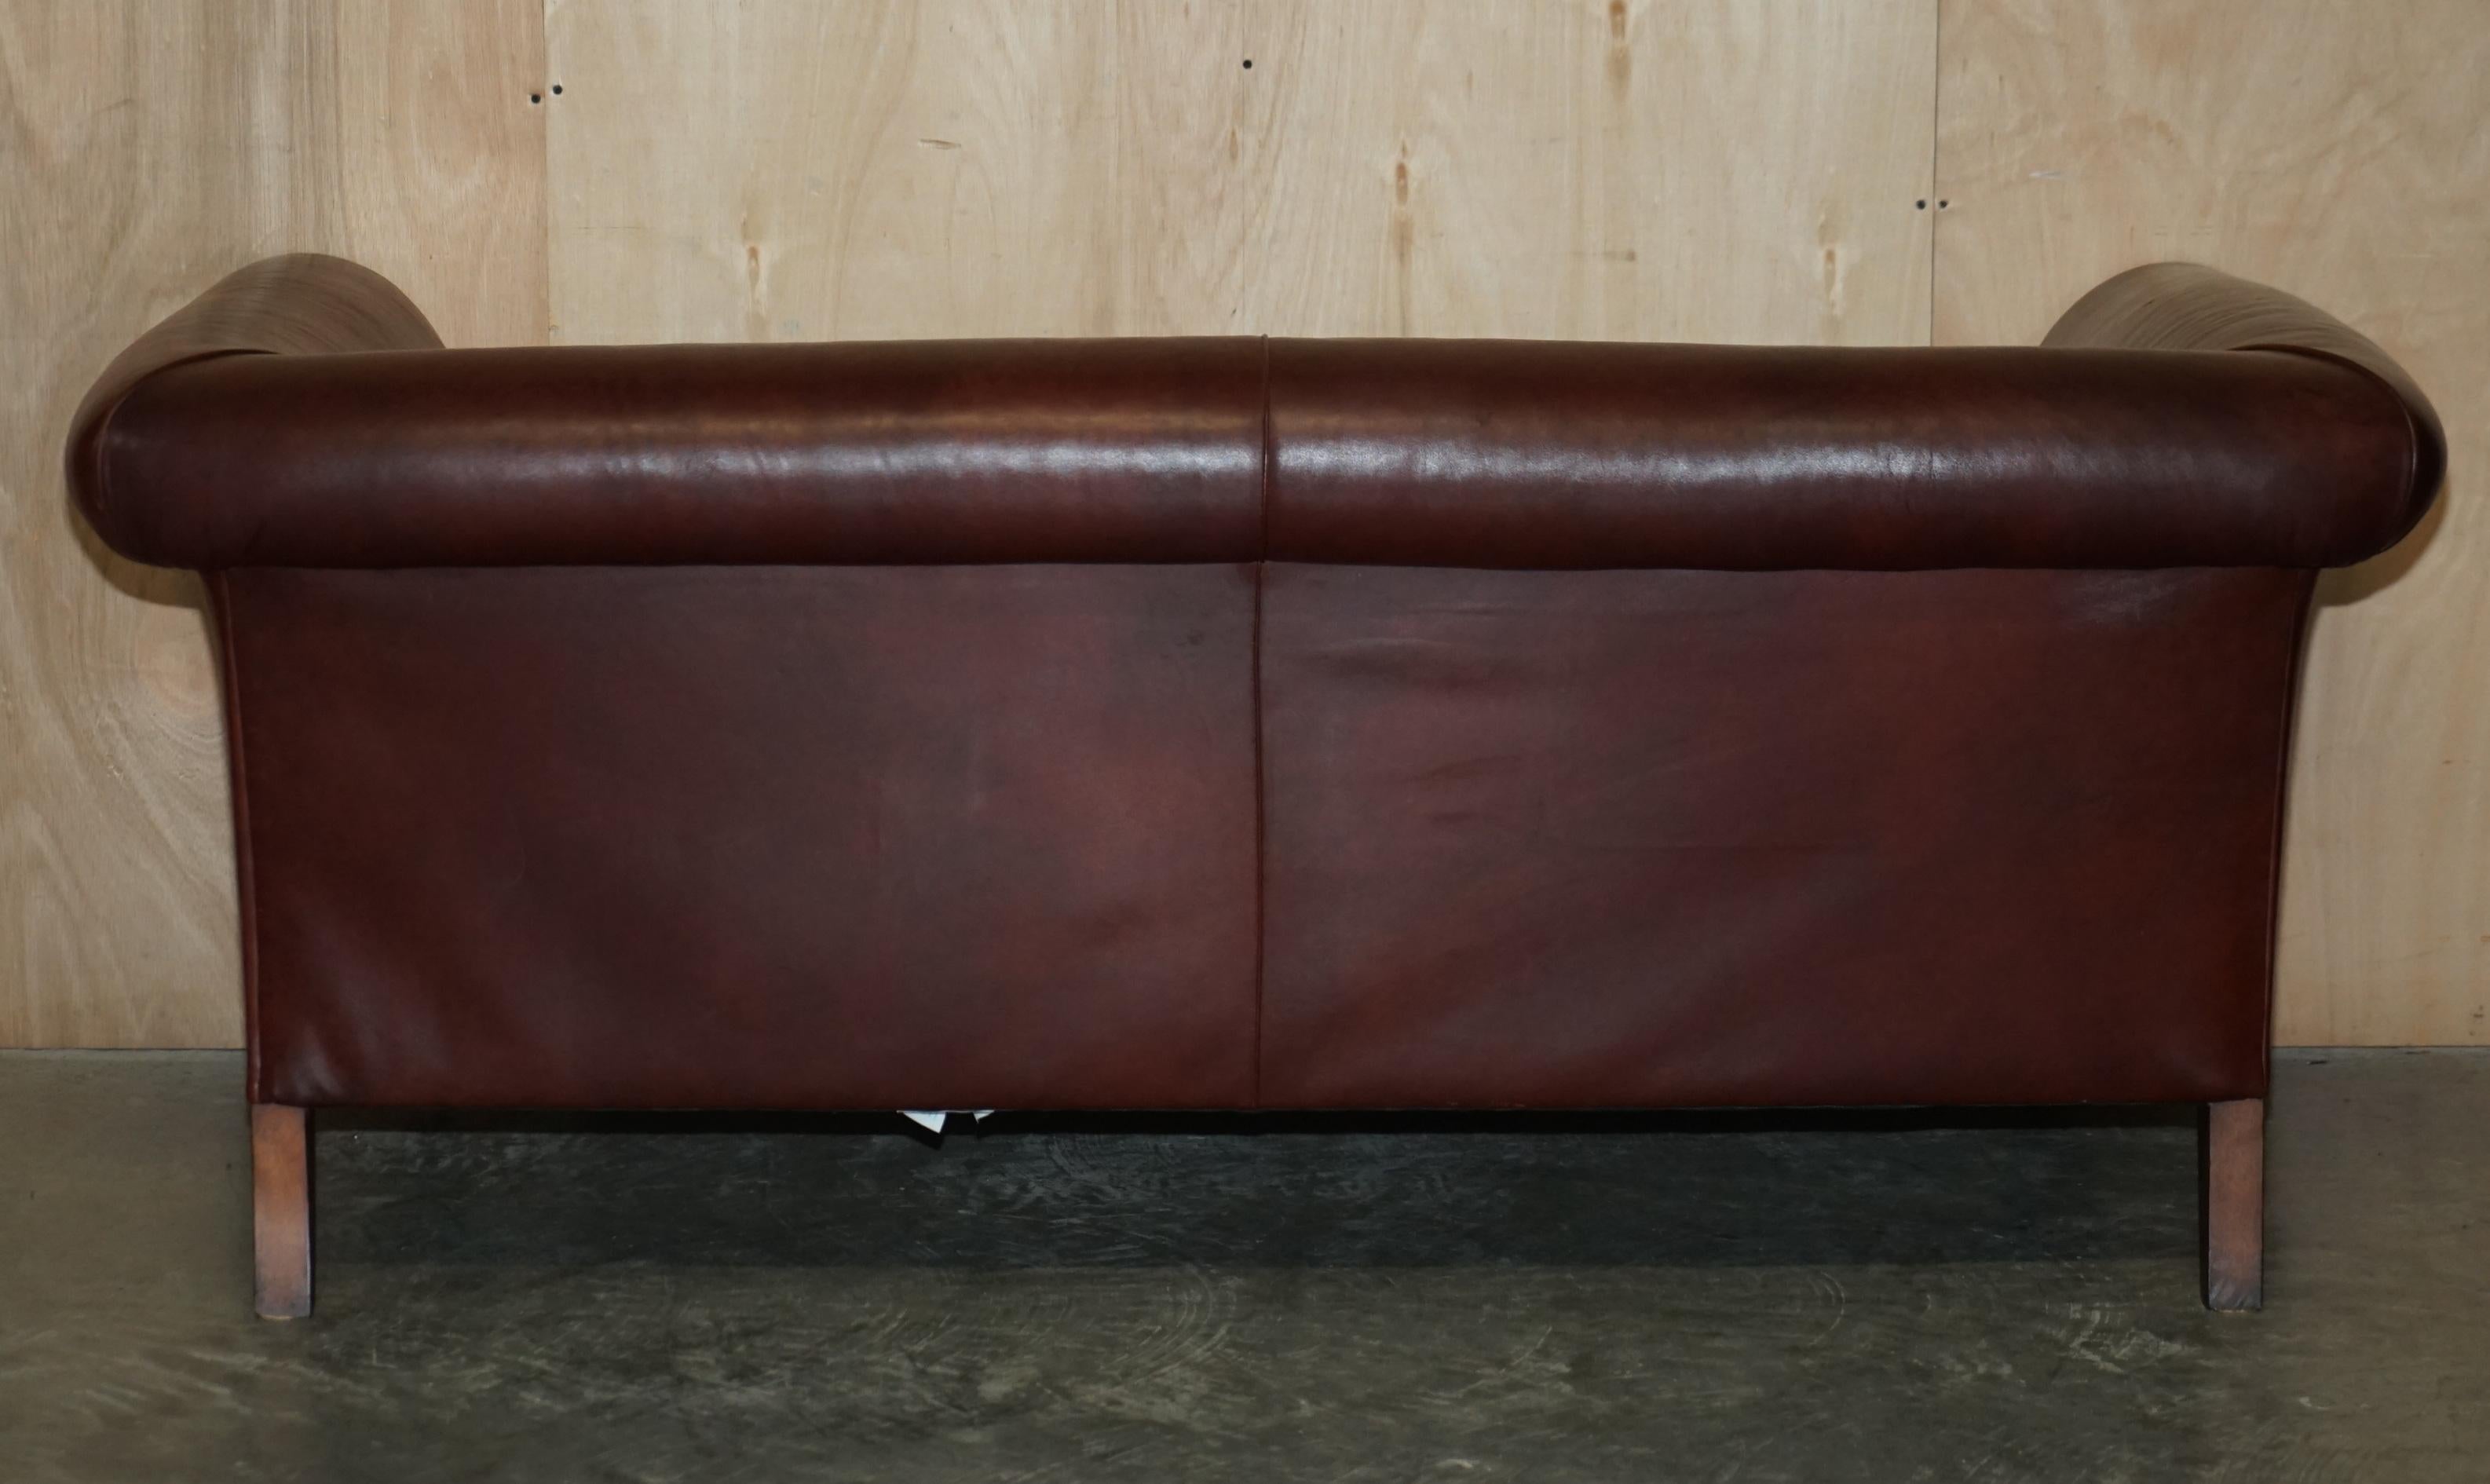 ViNTAGE DYED BROWN LEATHER ART DECO THREE SEAT SOFA FEATHER FILLED SEAT en vente 11